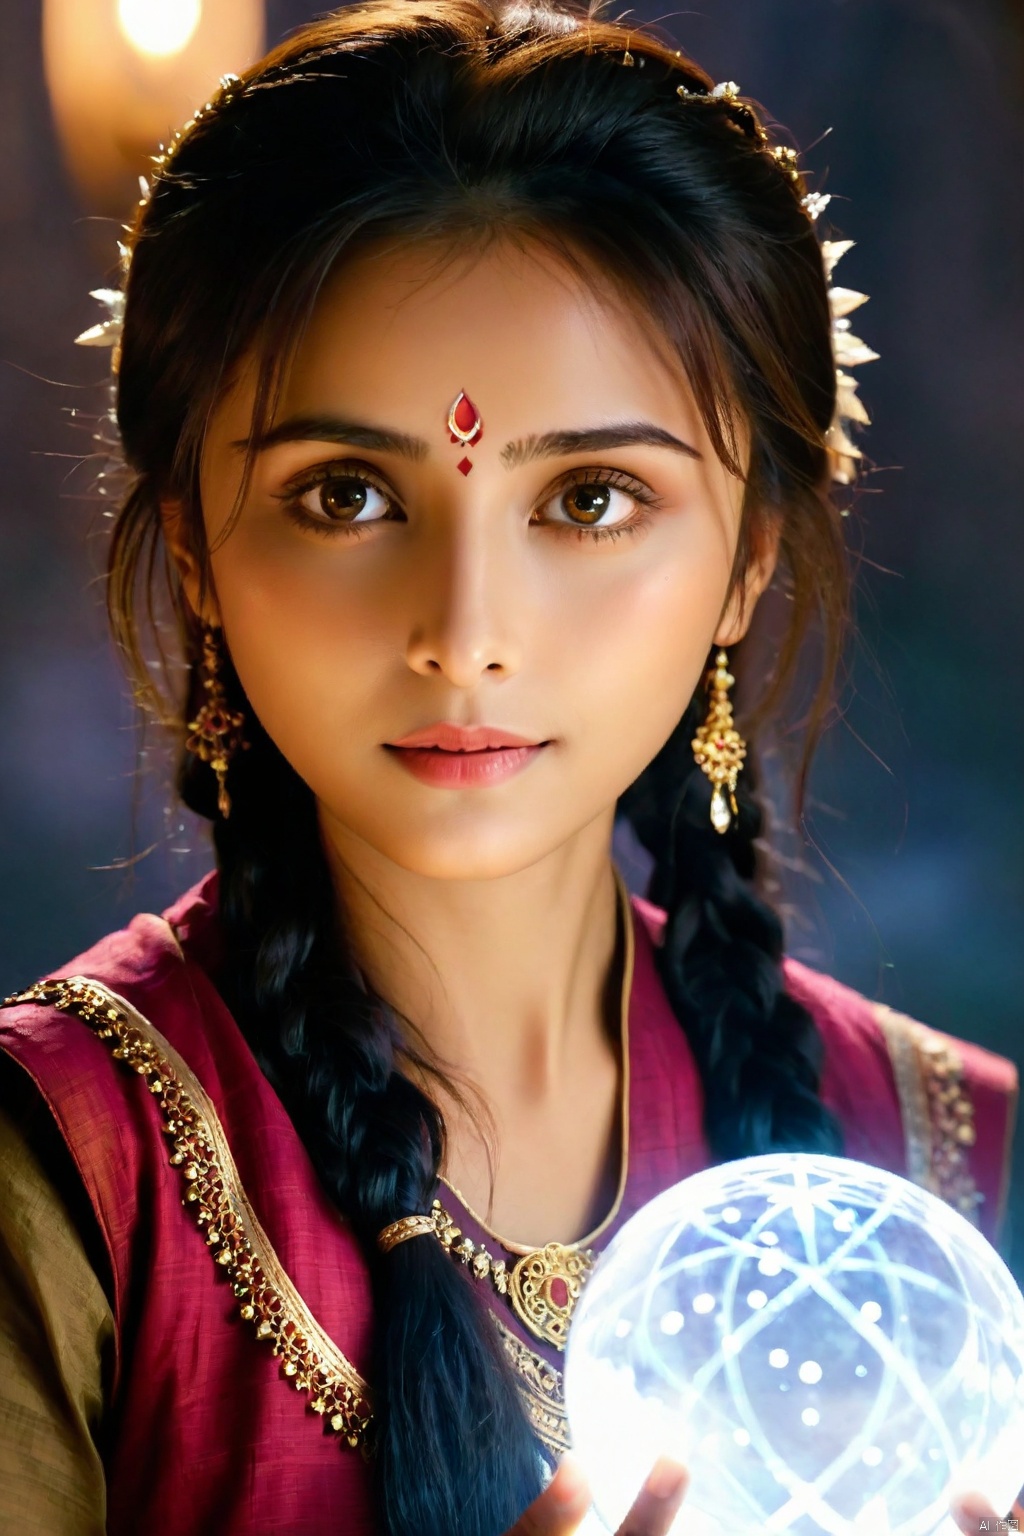  Main Character:a kind and courageous young woman.Magic Item:A glowing mirror that allows Rani to travel to different worlds.